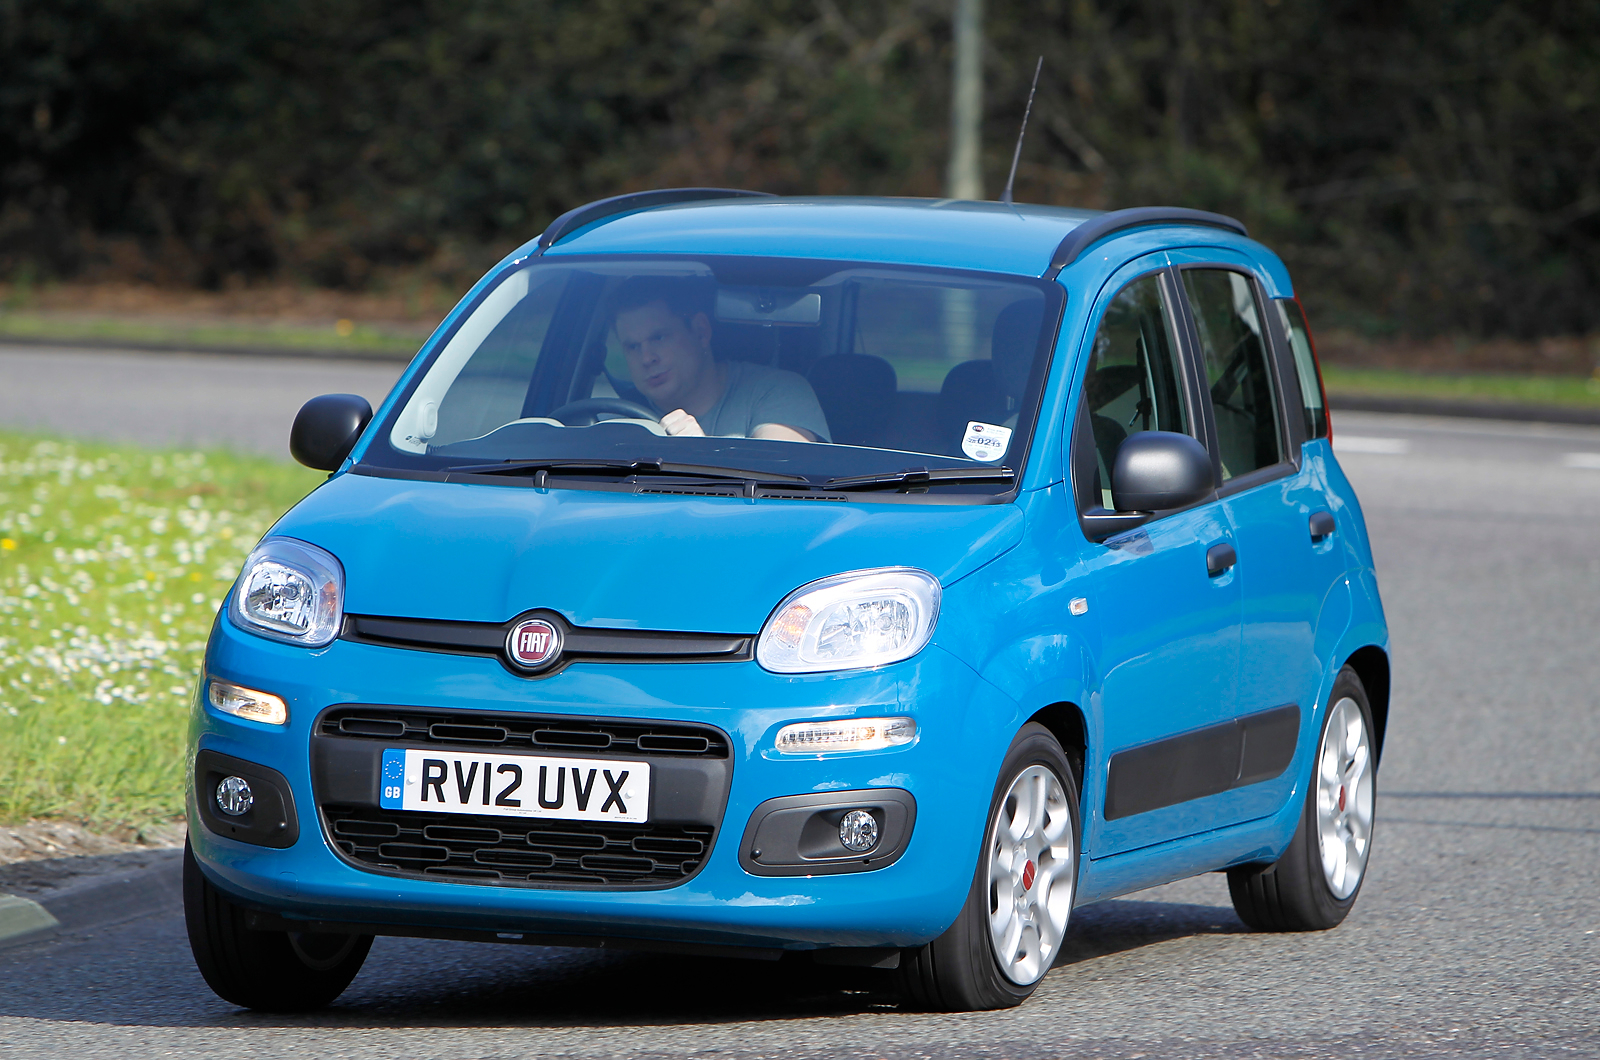 Fiat Panda 4x4 Makes A Comeback As Special Edition Model